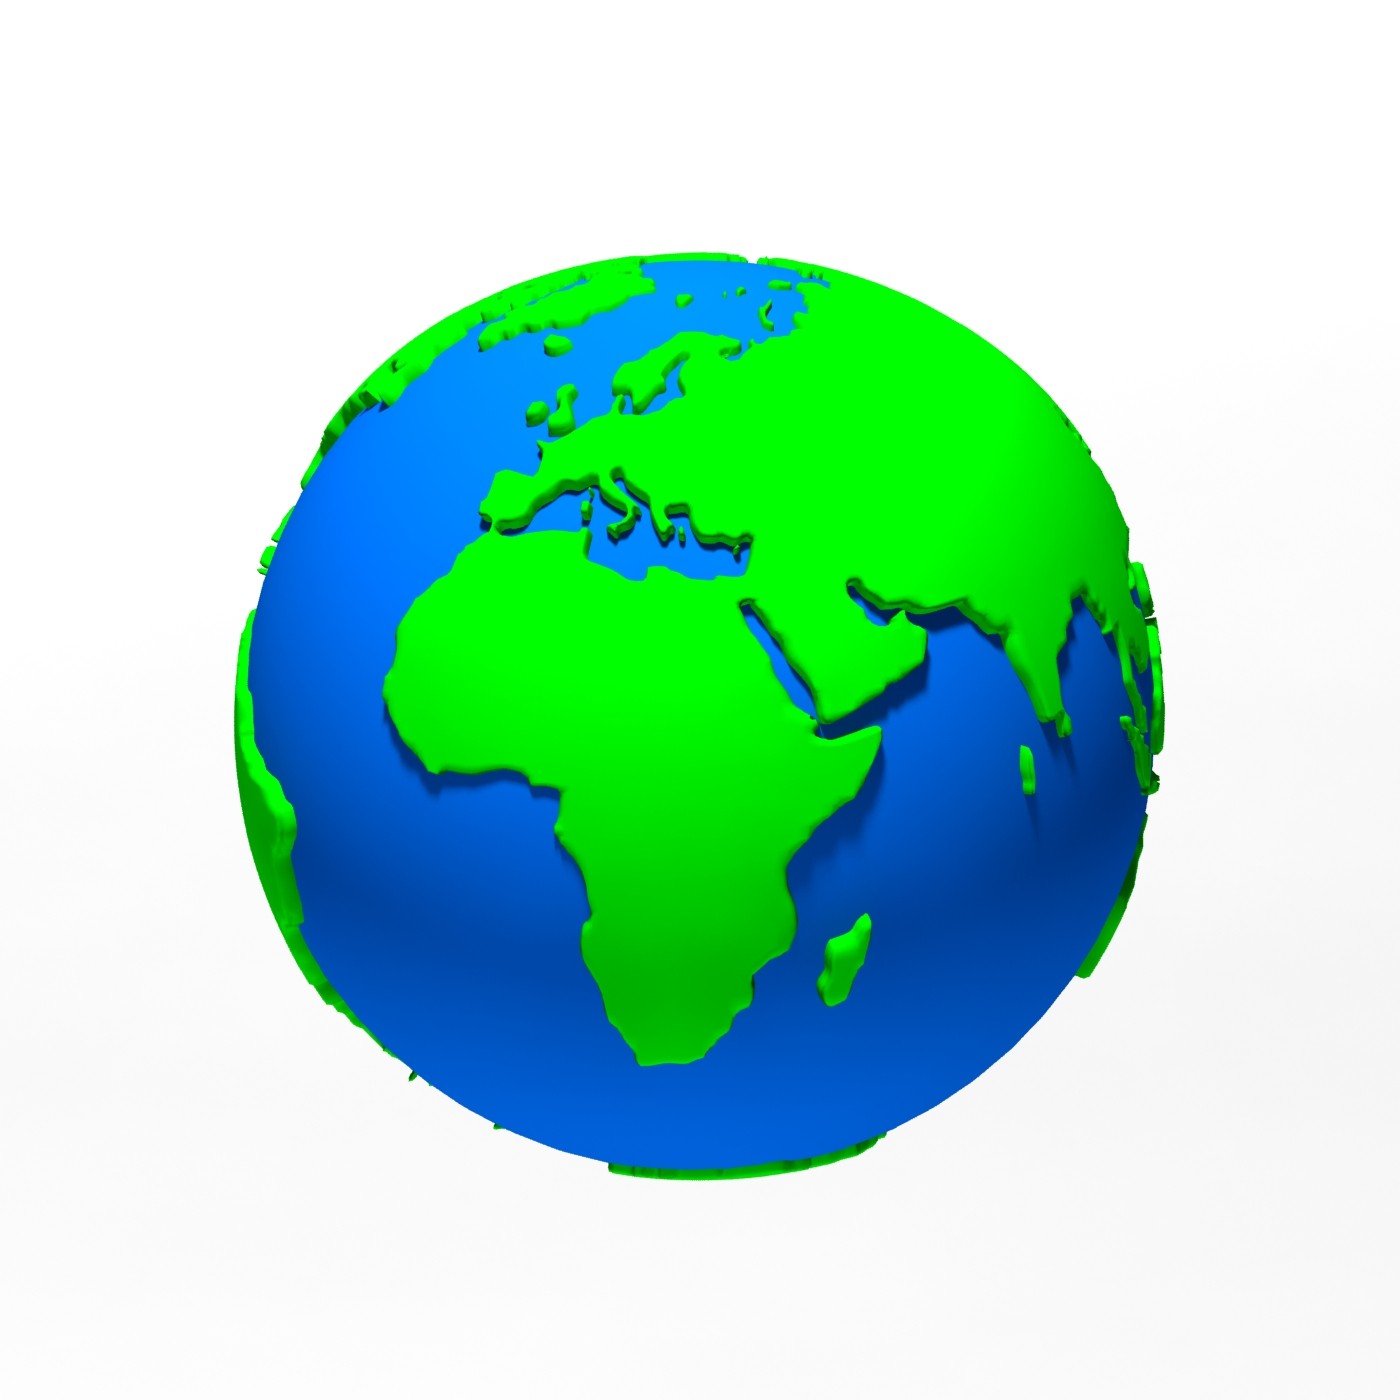 3d Globe Related Keywords & Suggestions - 3d Globe Long Tail Keywords